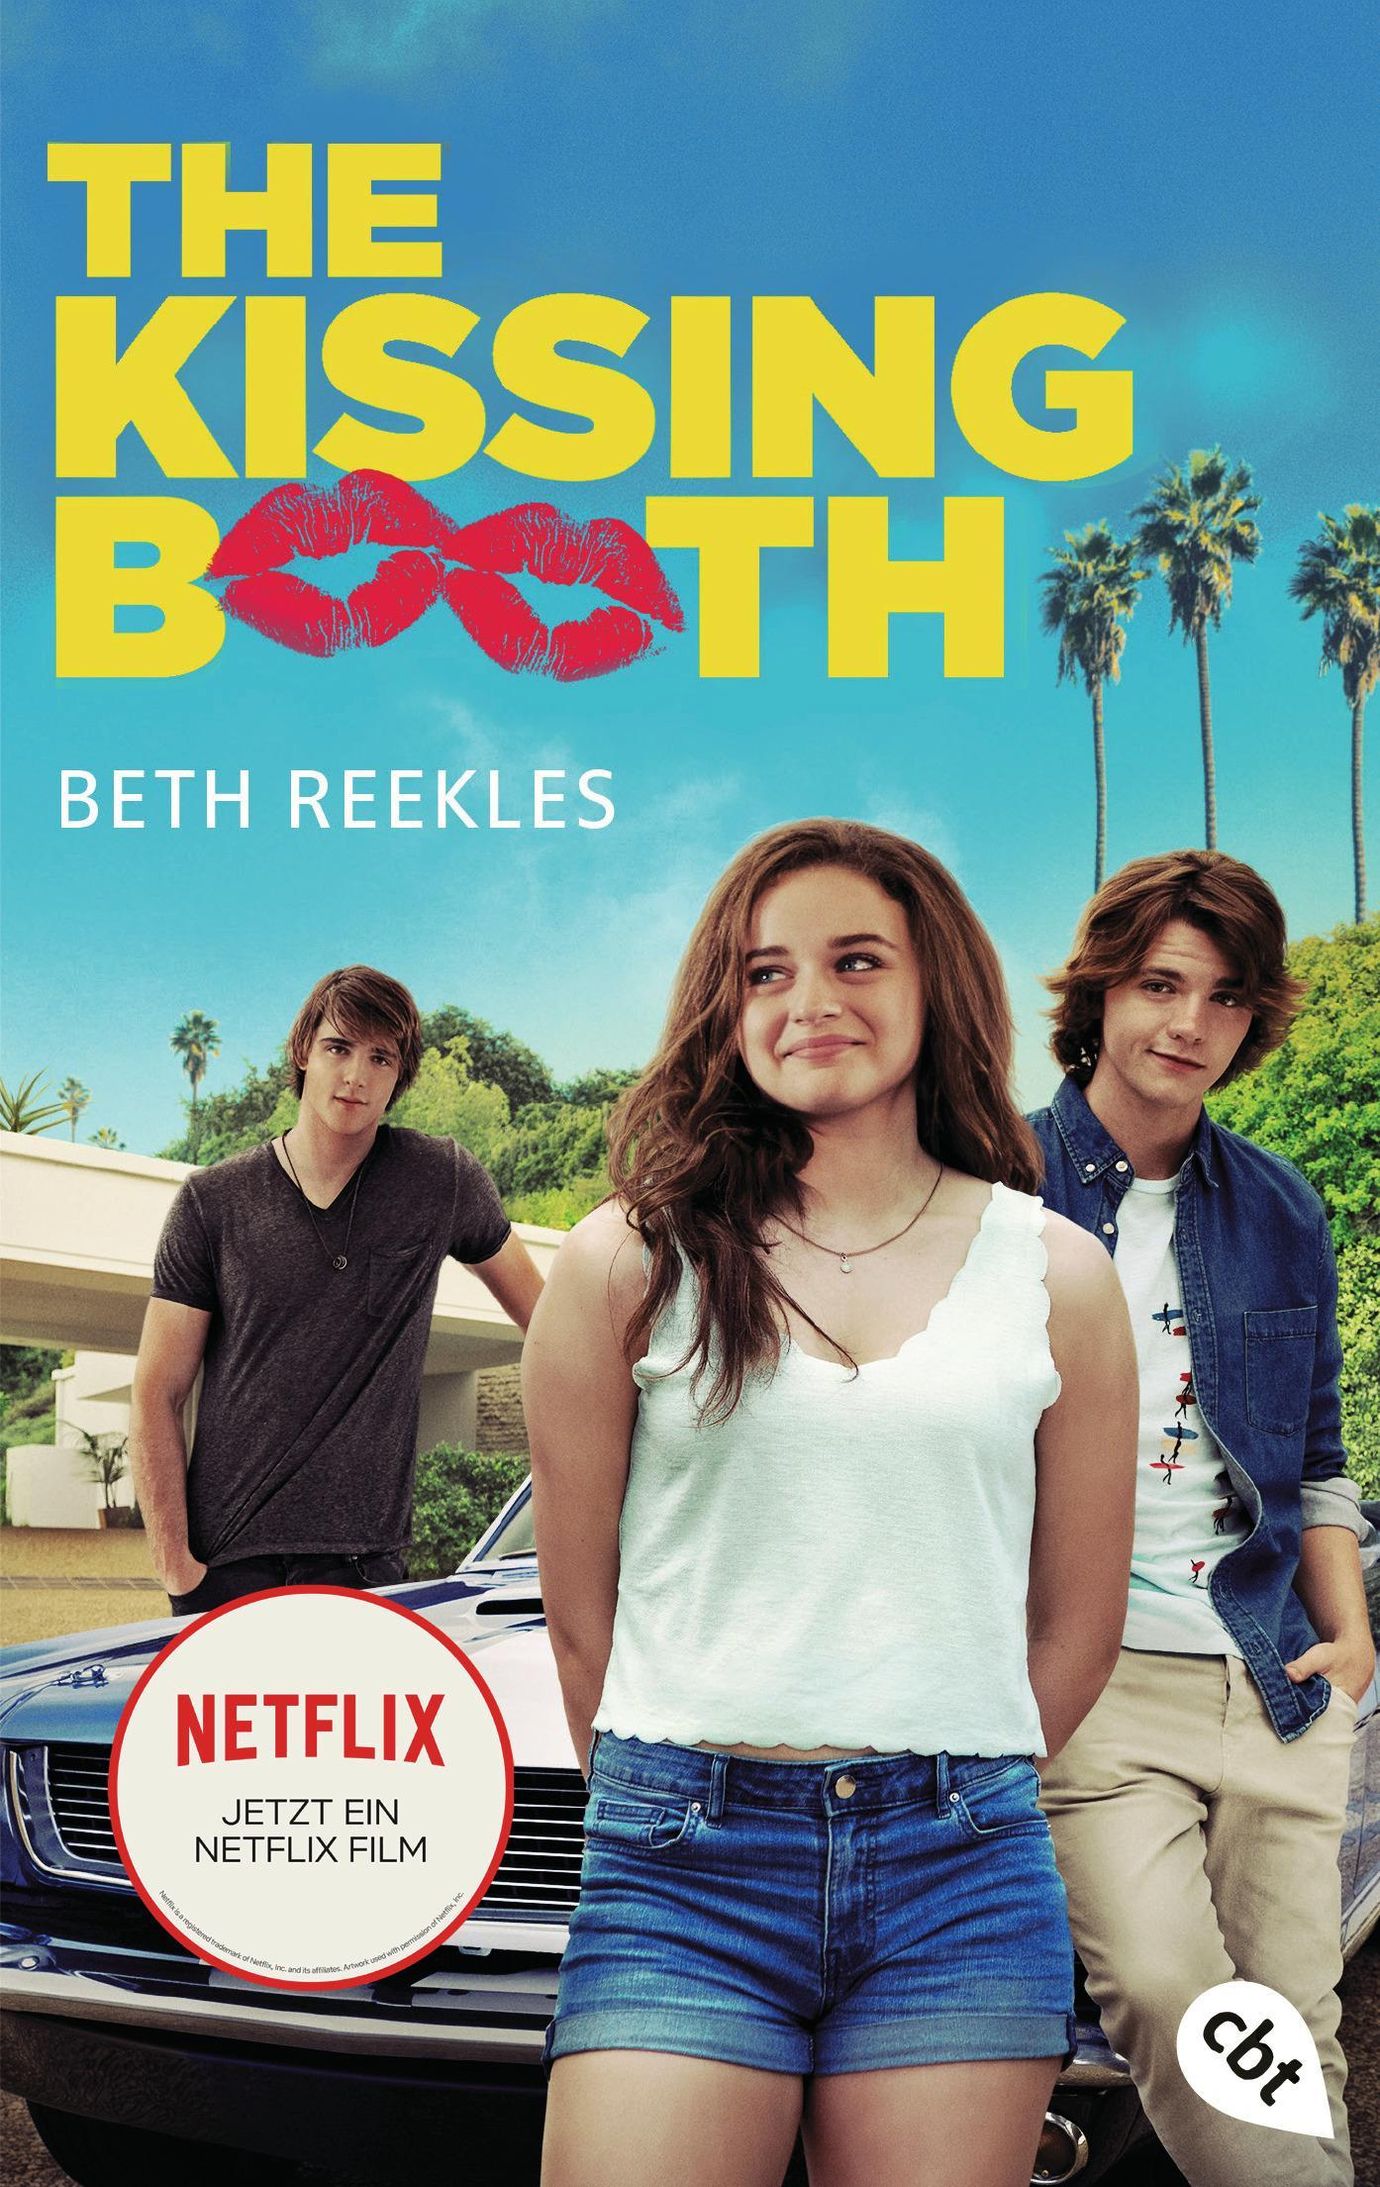 The Kissing Booth Kissing Booth Bd.1 eBook v. Beth Reekles | Weltbild